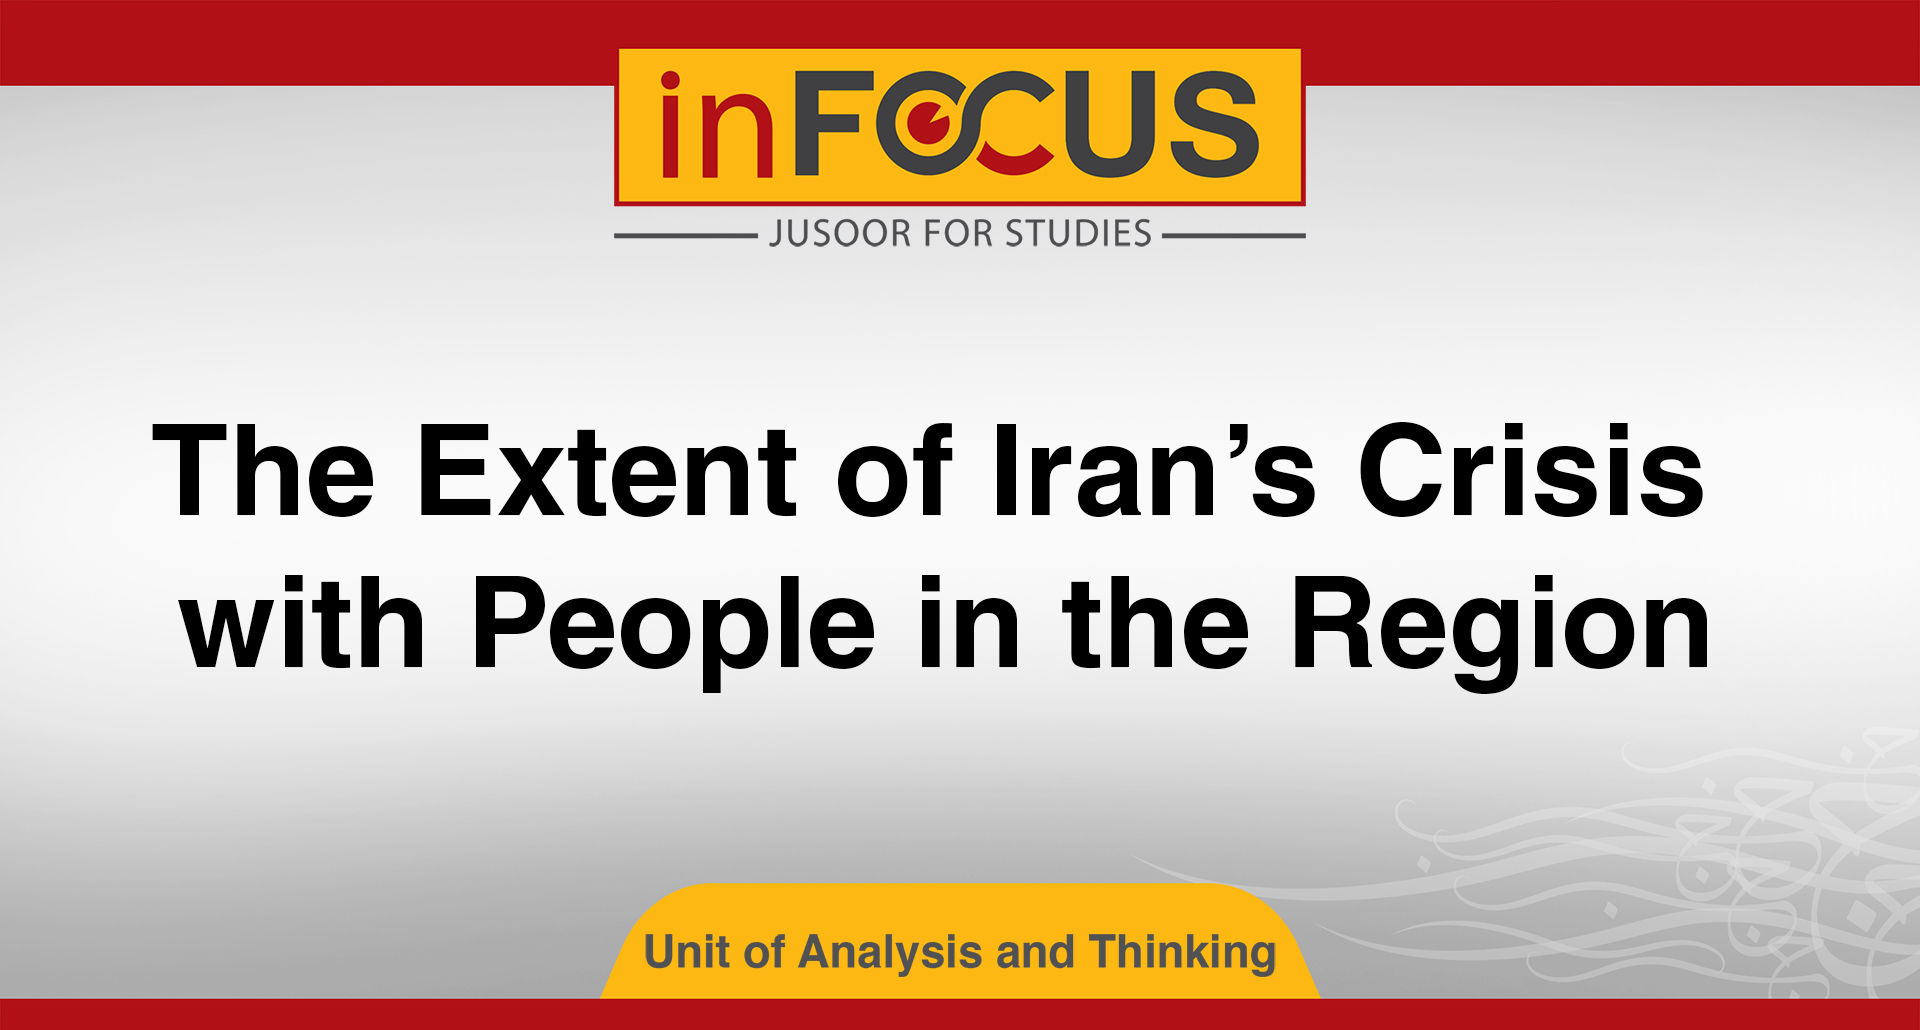 The Extent of Iran’s Crisis with People in the Region